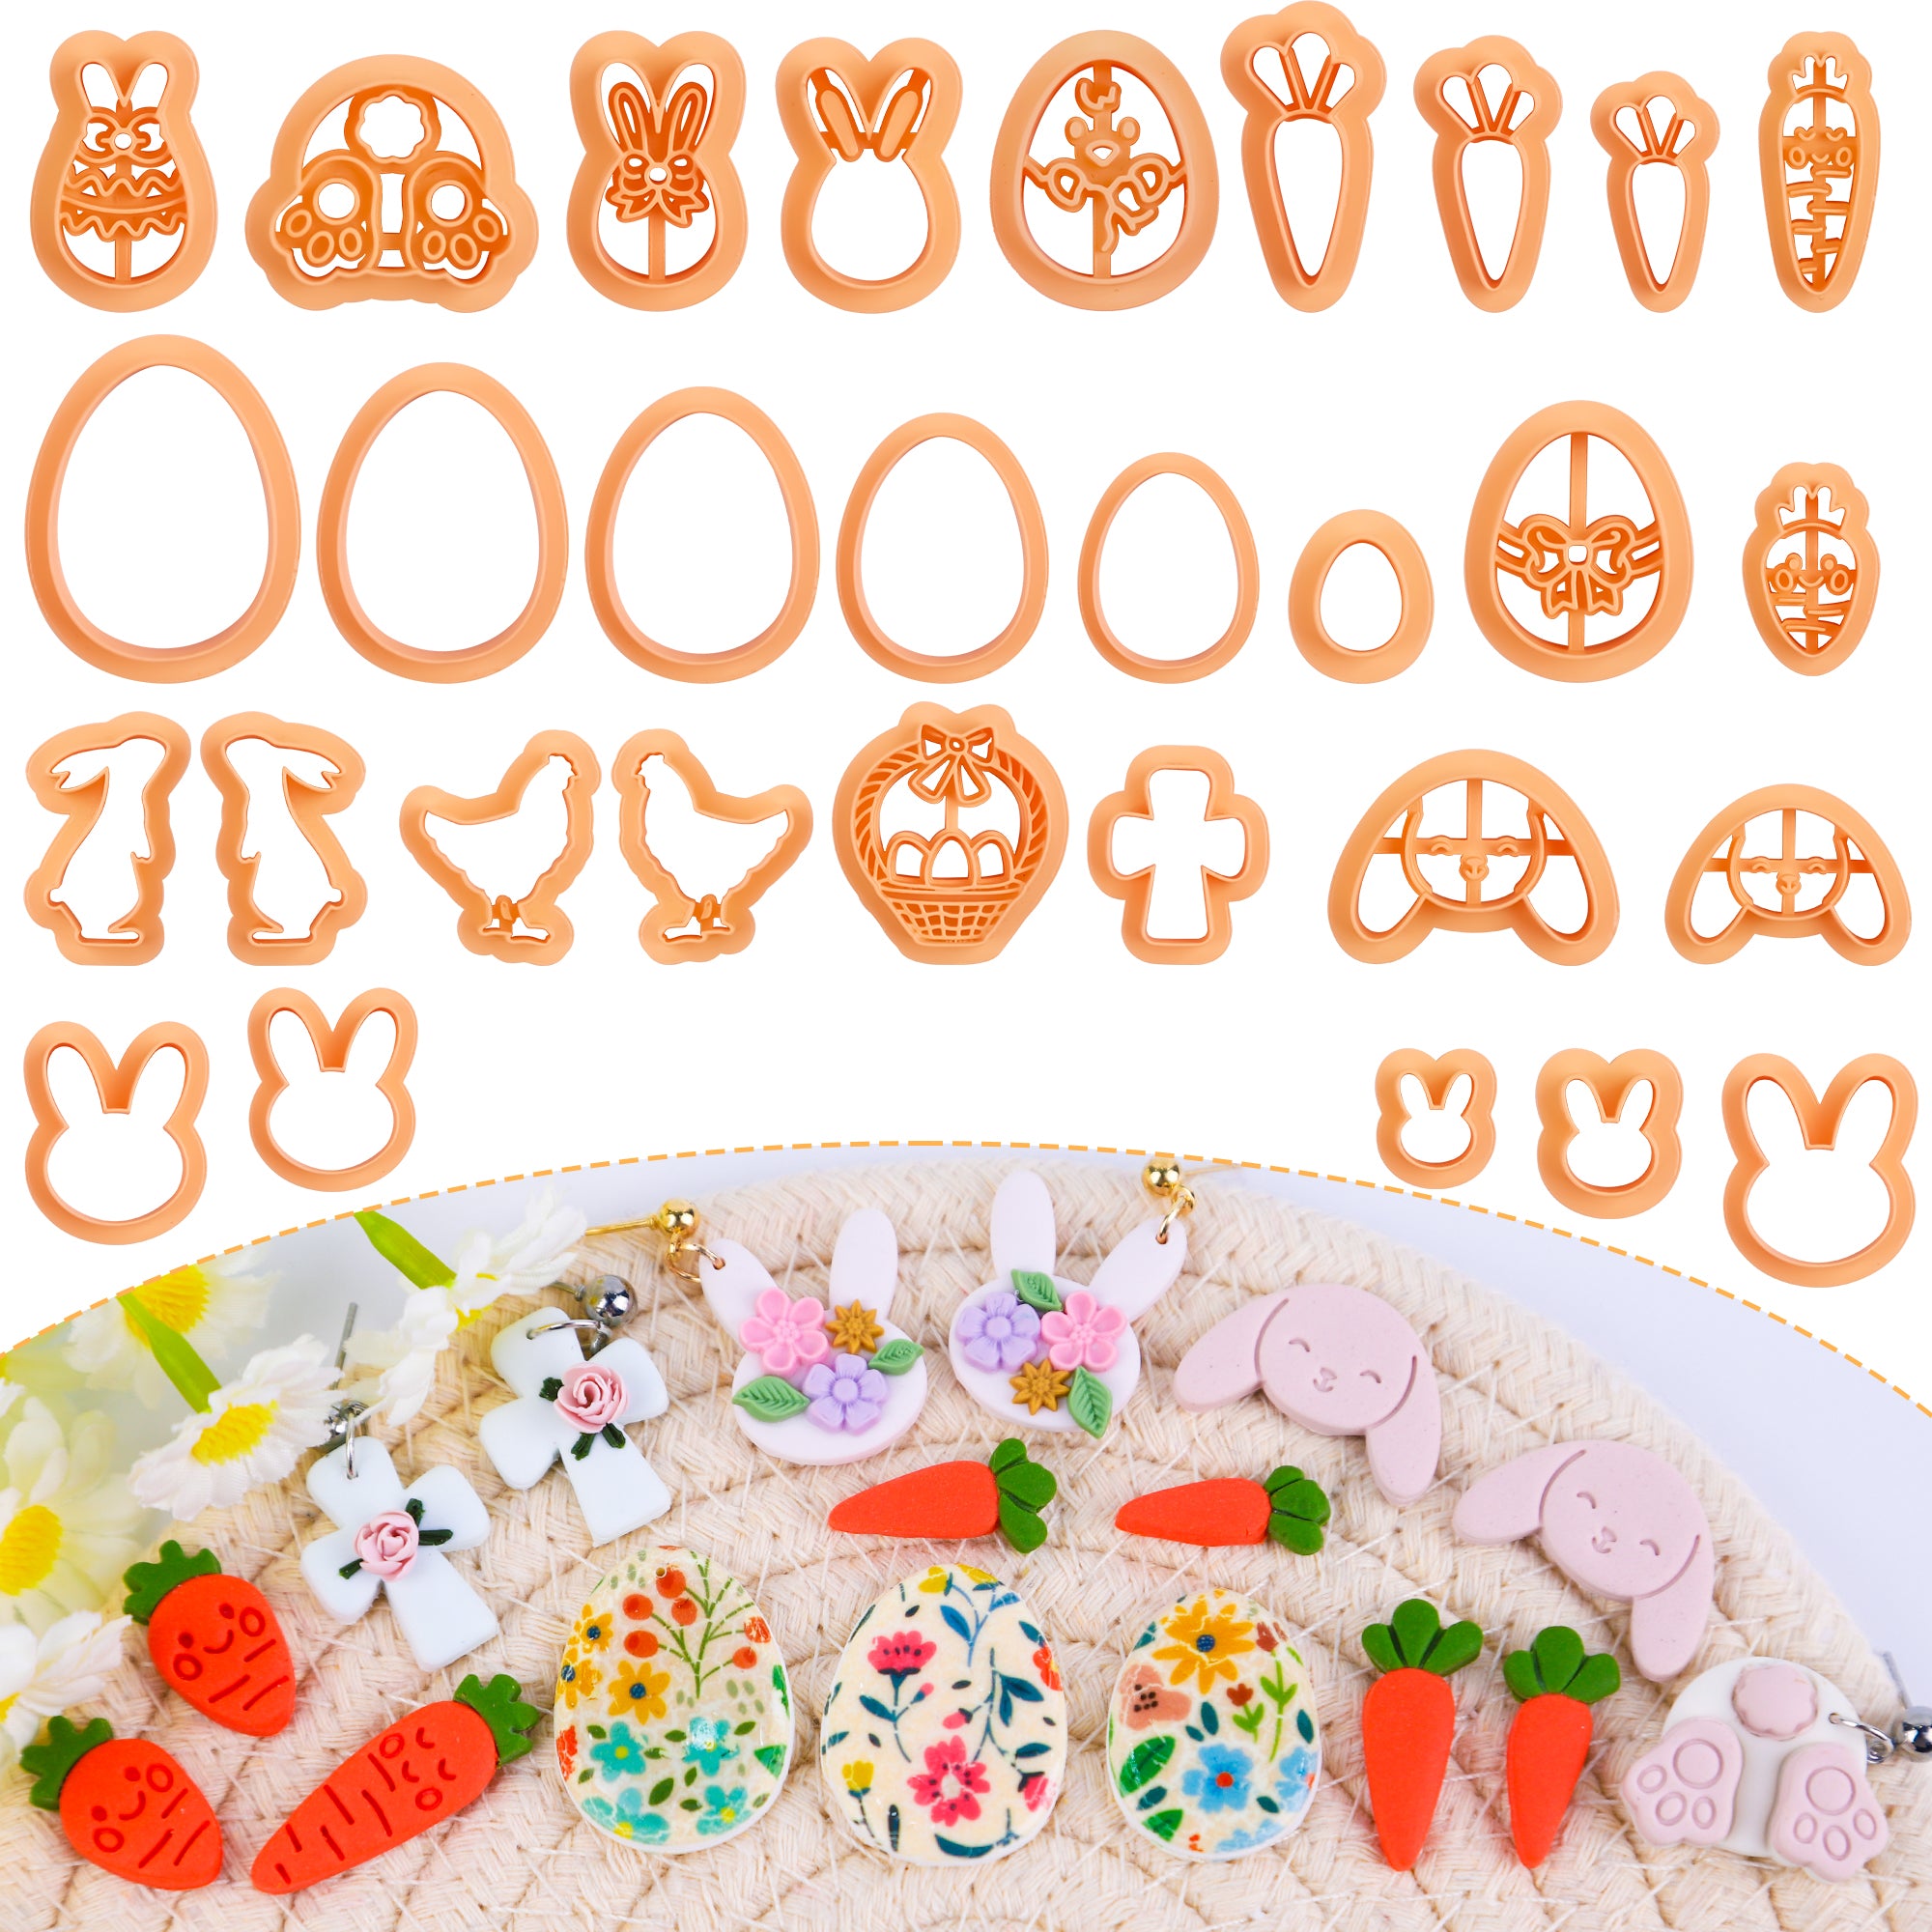 Puocaon Easter Clay Cutters, 30 Pcs Polymer Clay Cutters for Jewelry, Basic Rabbit Egg Carrot Clay Earring Cutters, Mirrored Bunny Chicken Clay Cutters for Earrings, Egg Basket Clay Jewelry Cutters